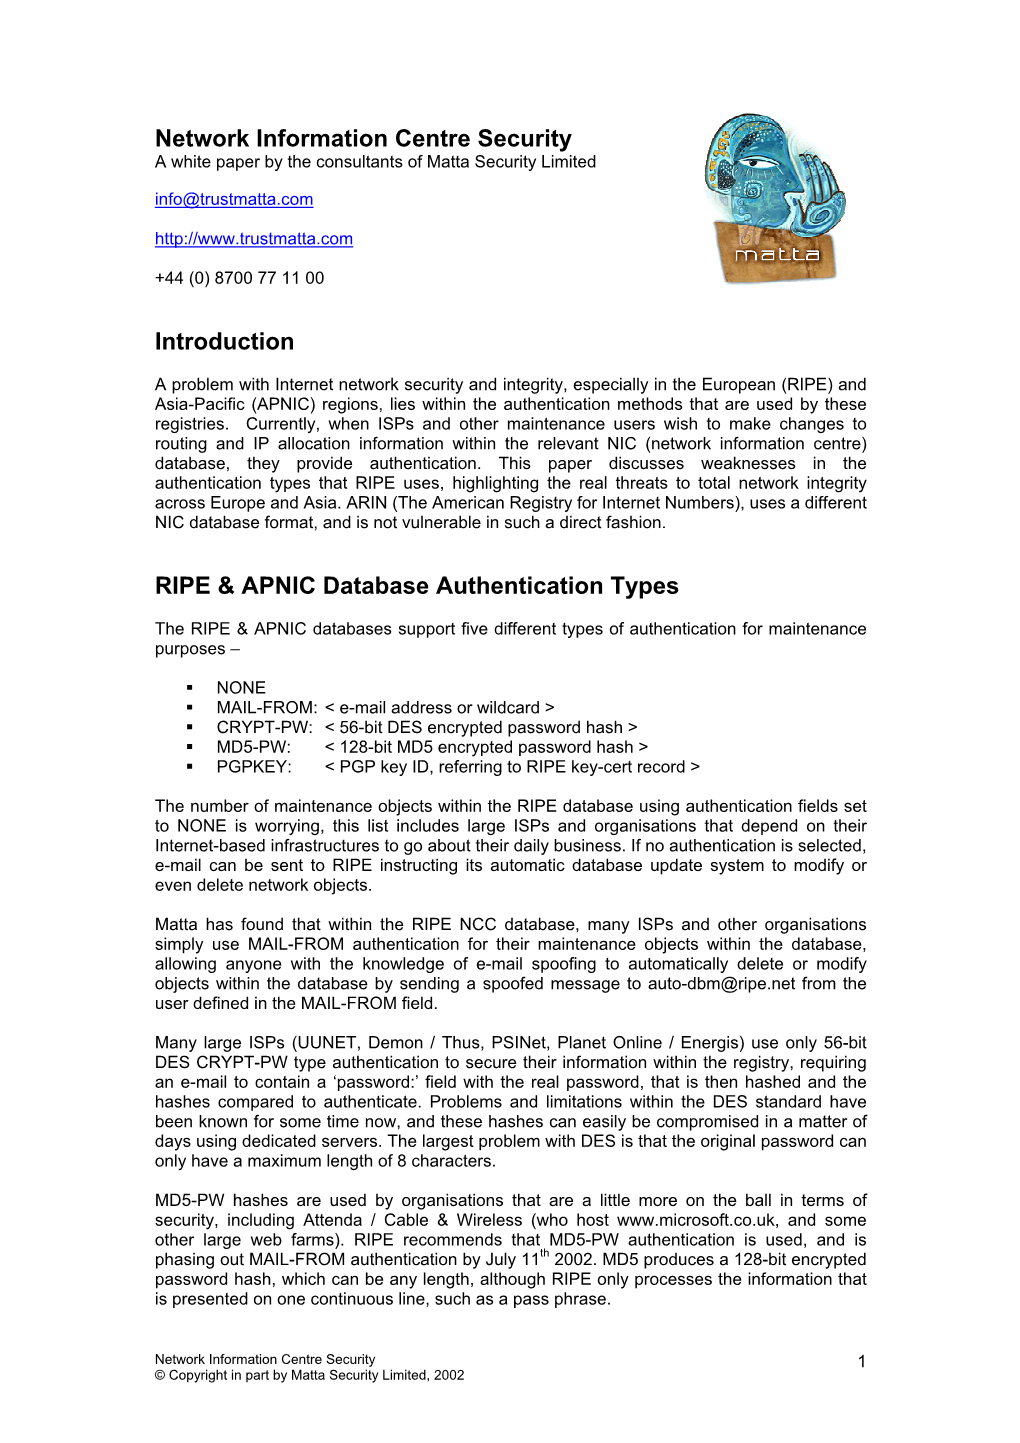 Network Information Centre Security Introduction RIPE & APNIC